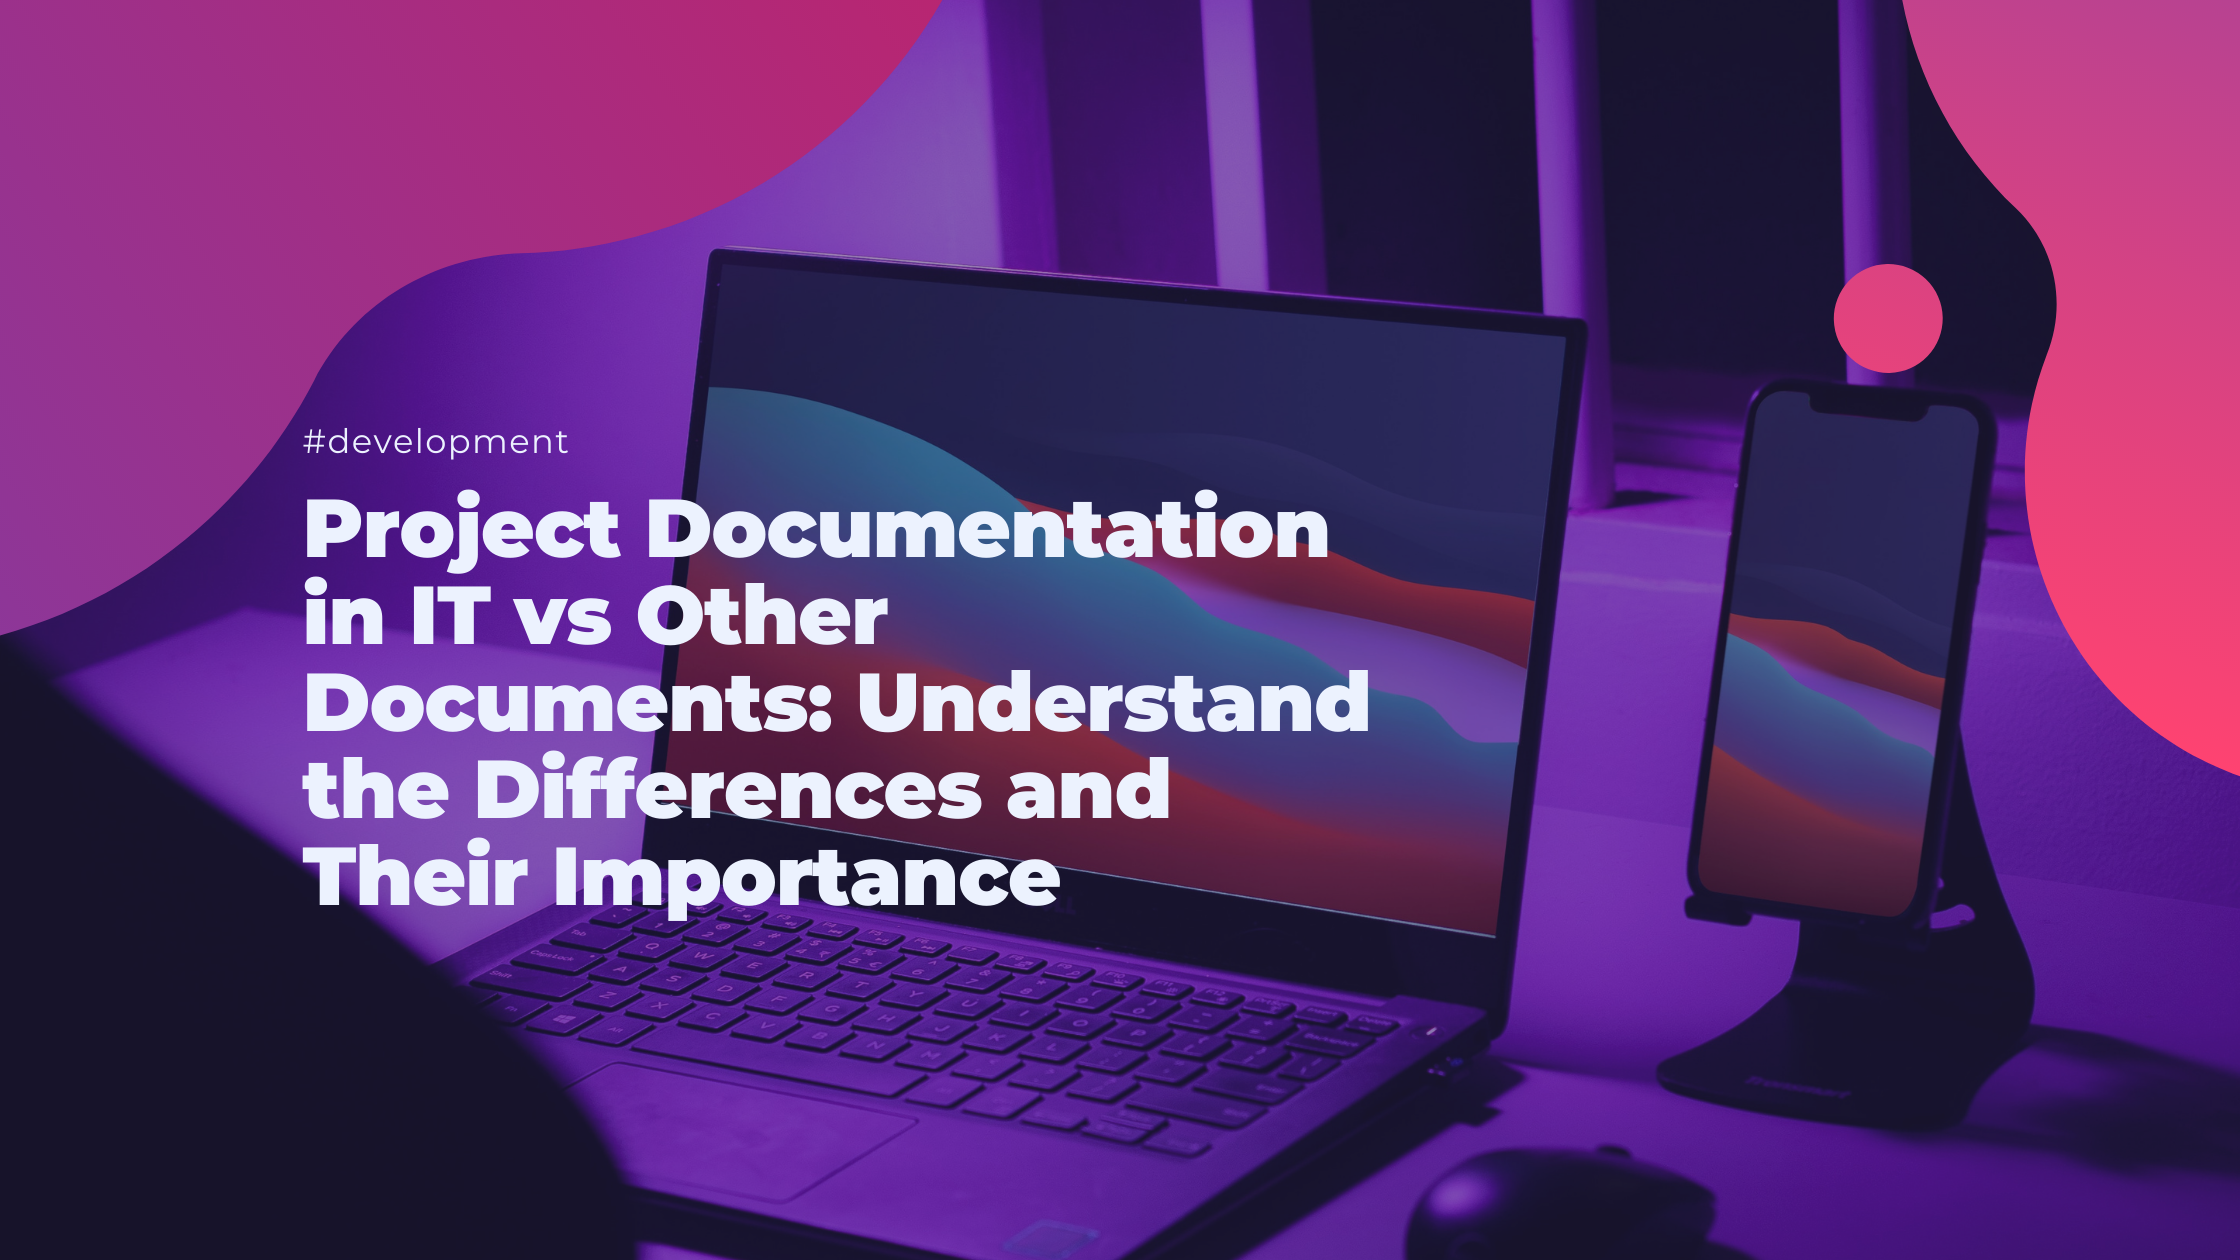 Project Documentation in IT vs Other Documents: Understand the Differences and Their Importance